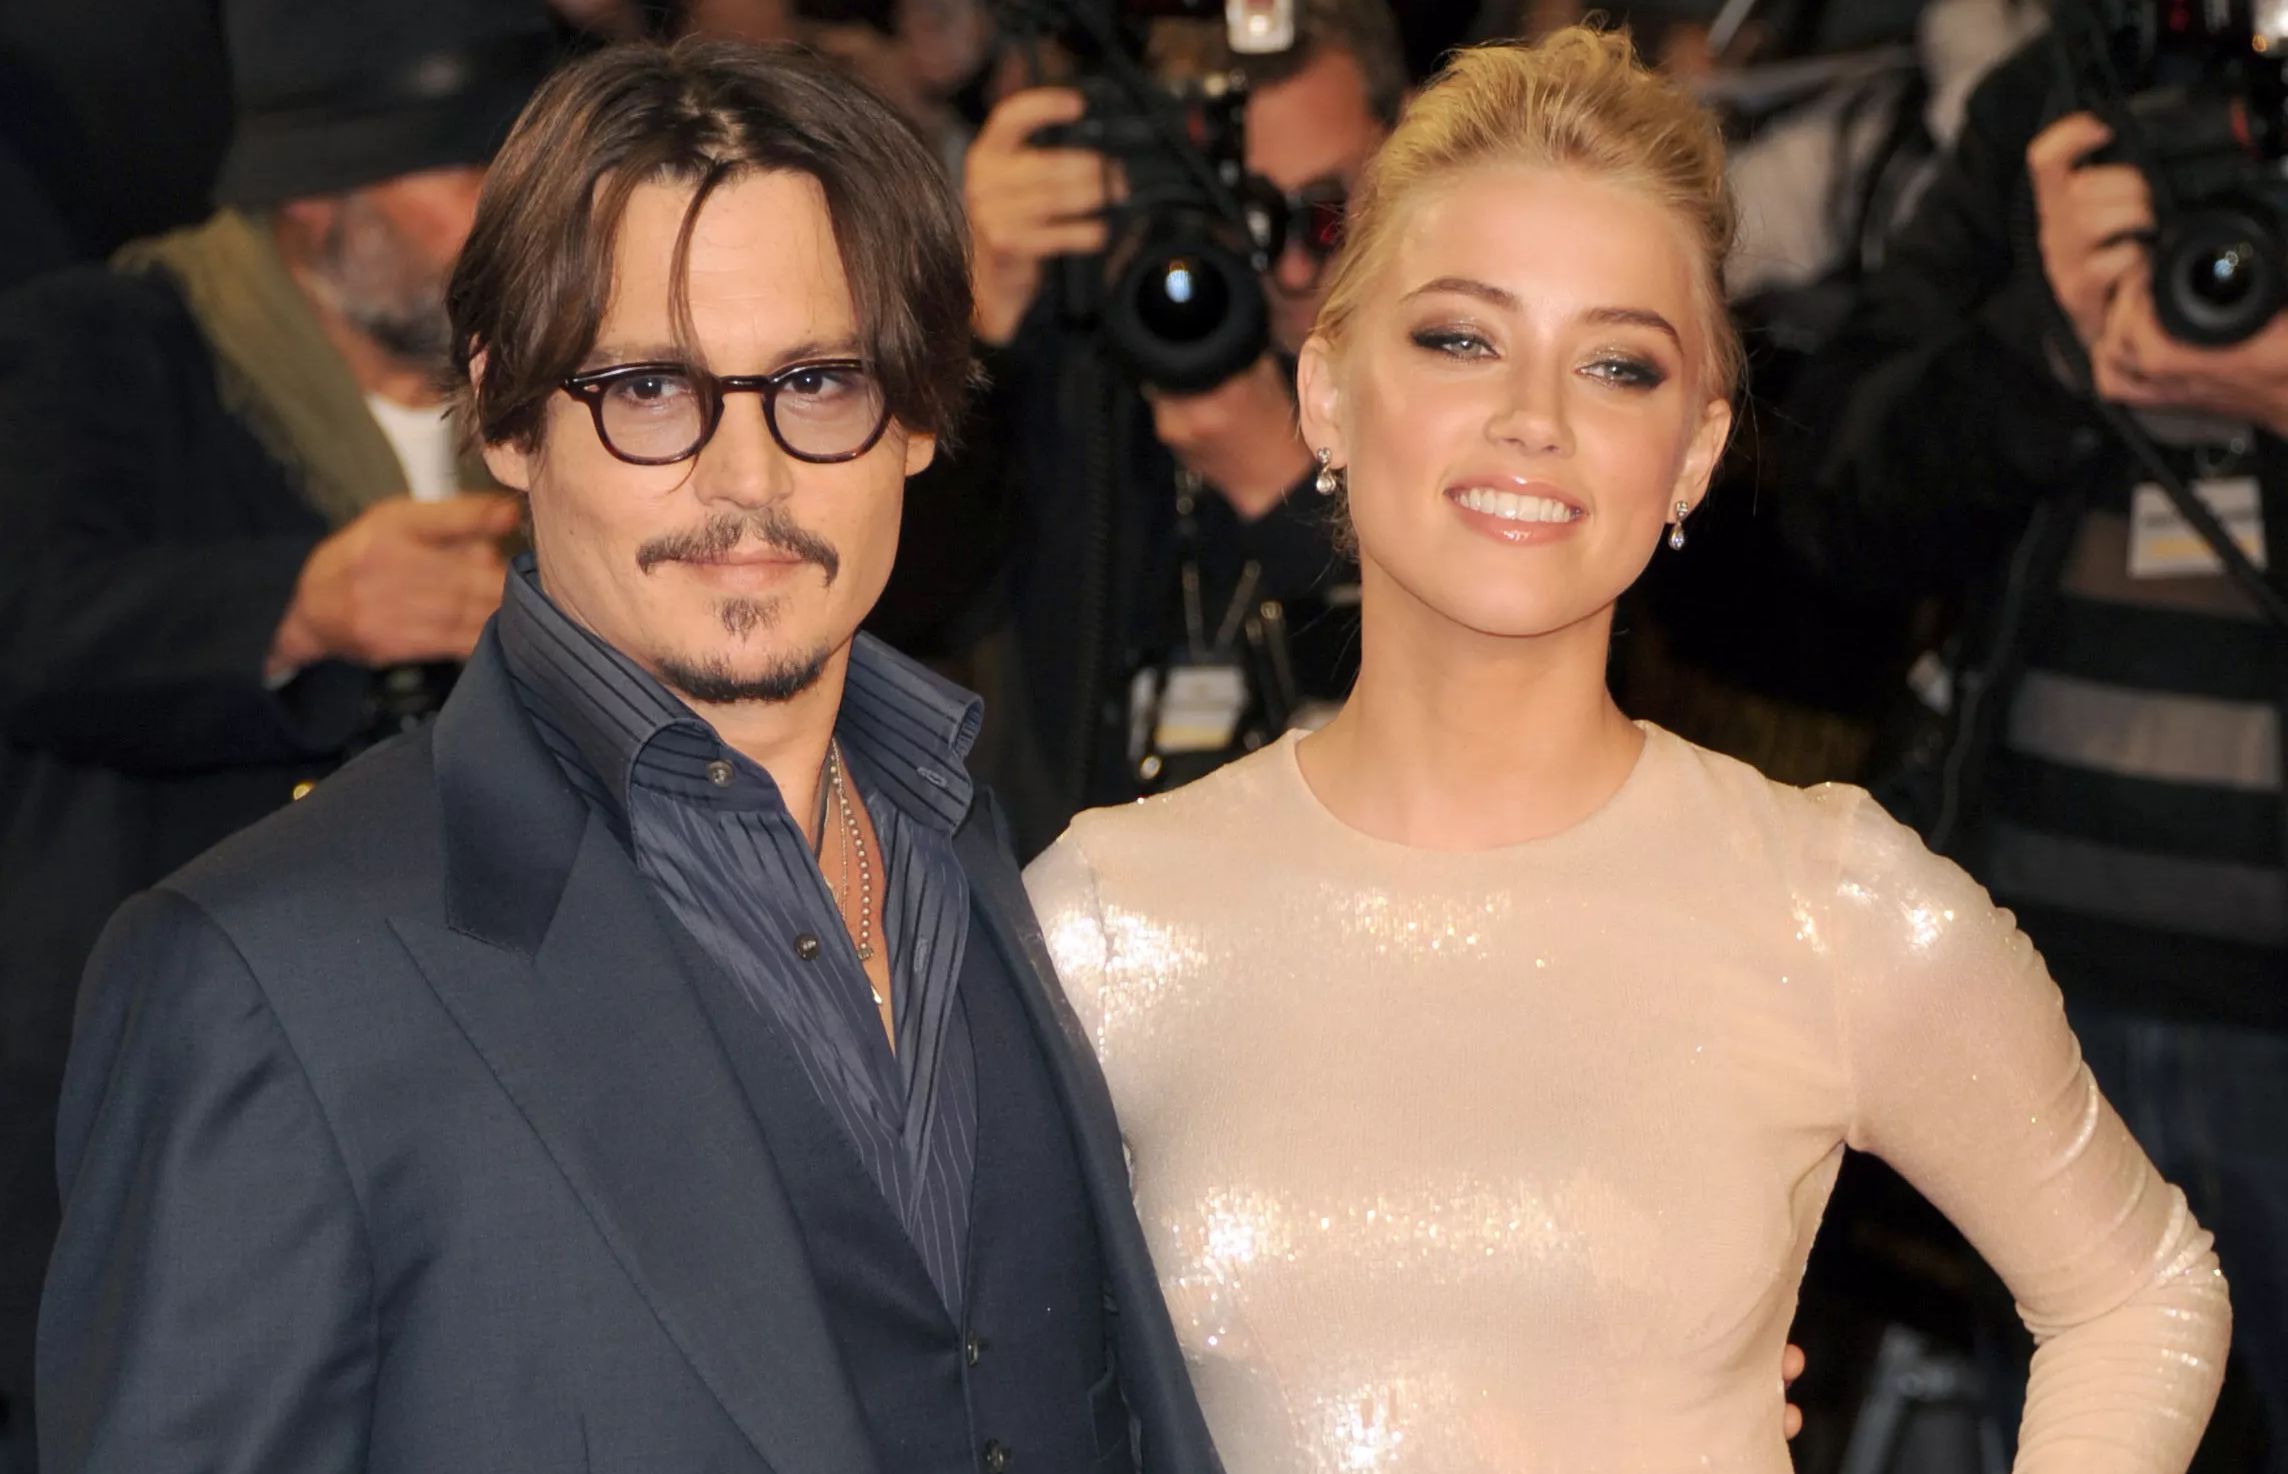 Did Amber Heard just confess to physically abusing Johnny Depp? Apparently she pelted the actor with pots and pans during their marriage. Read to find more details. 12